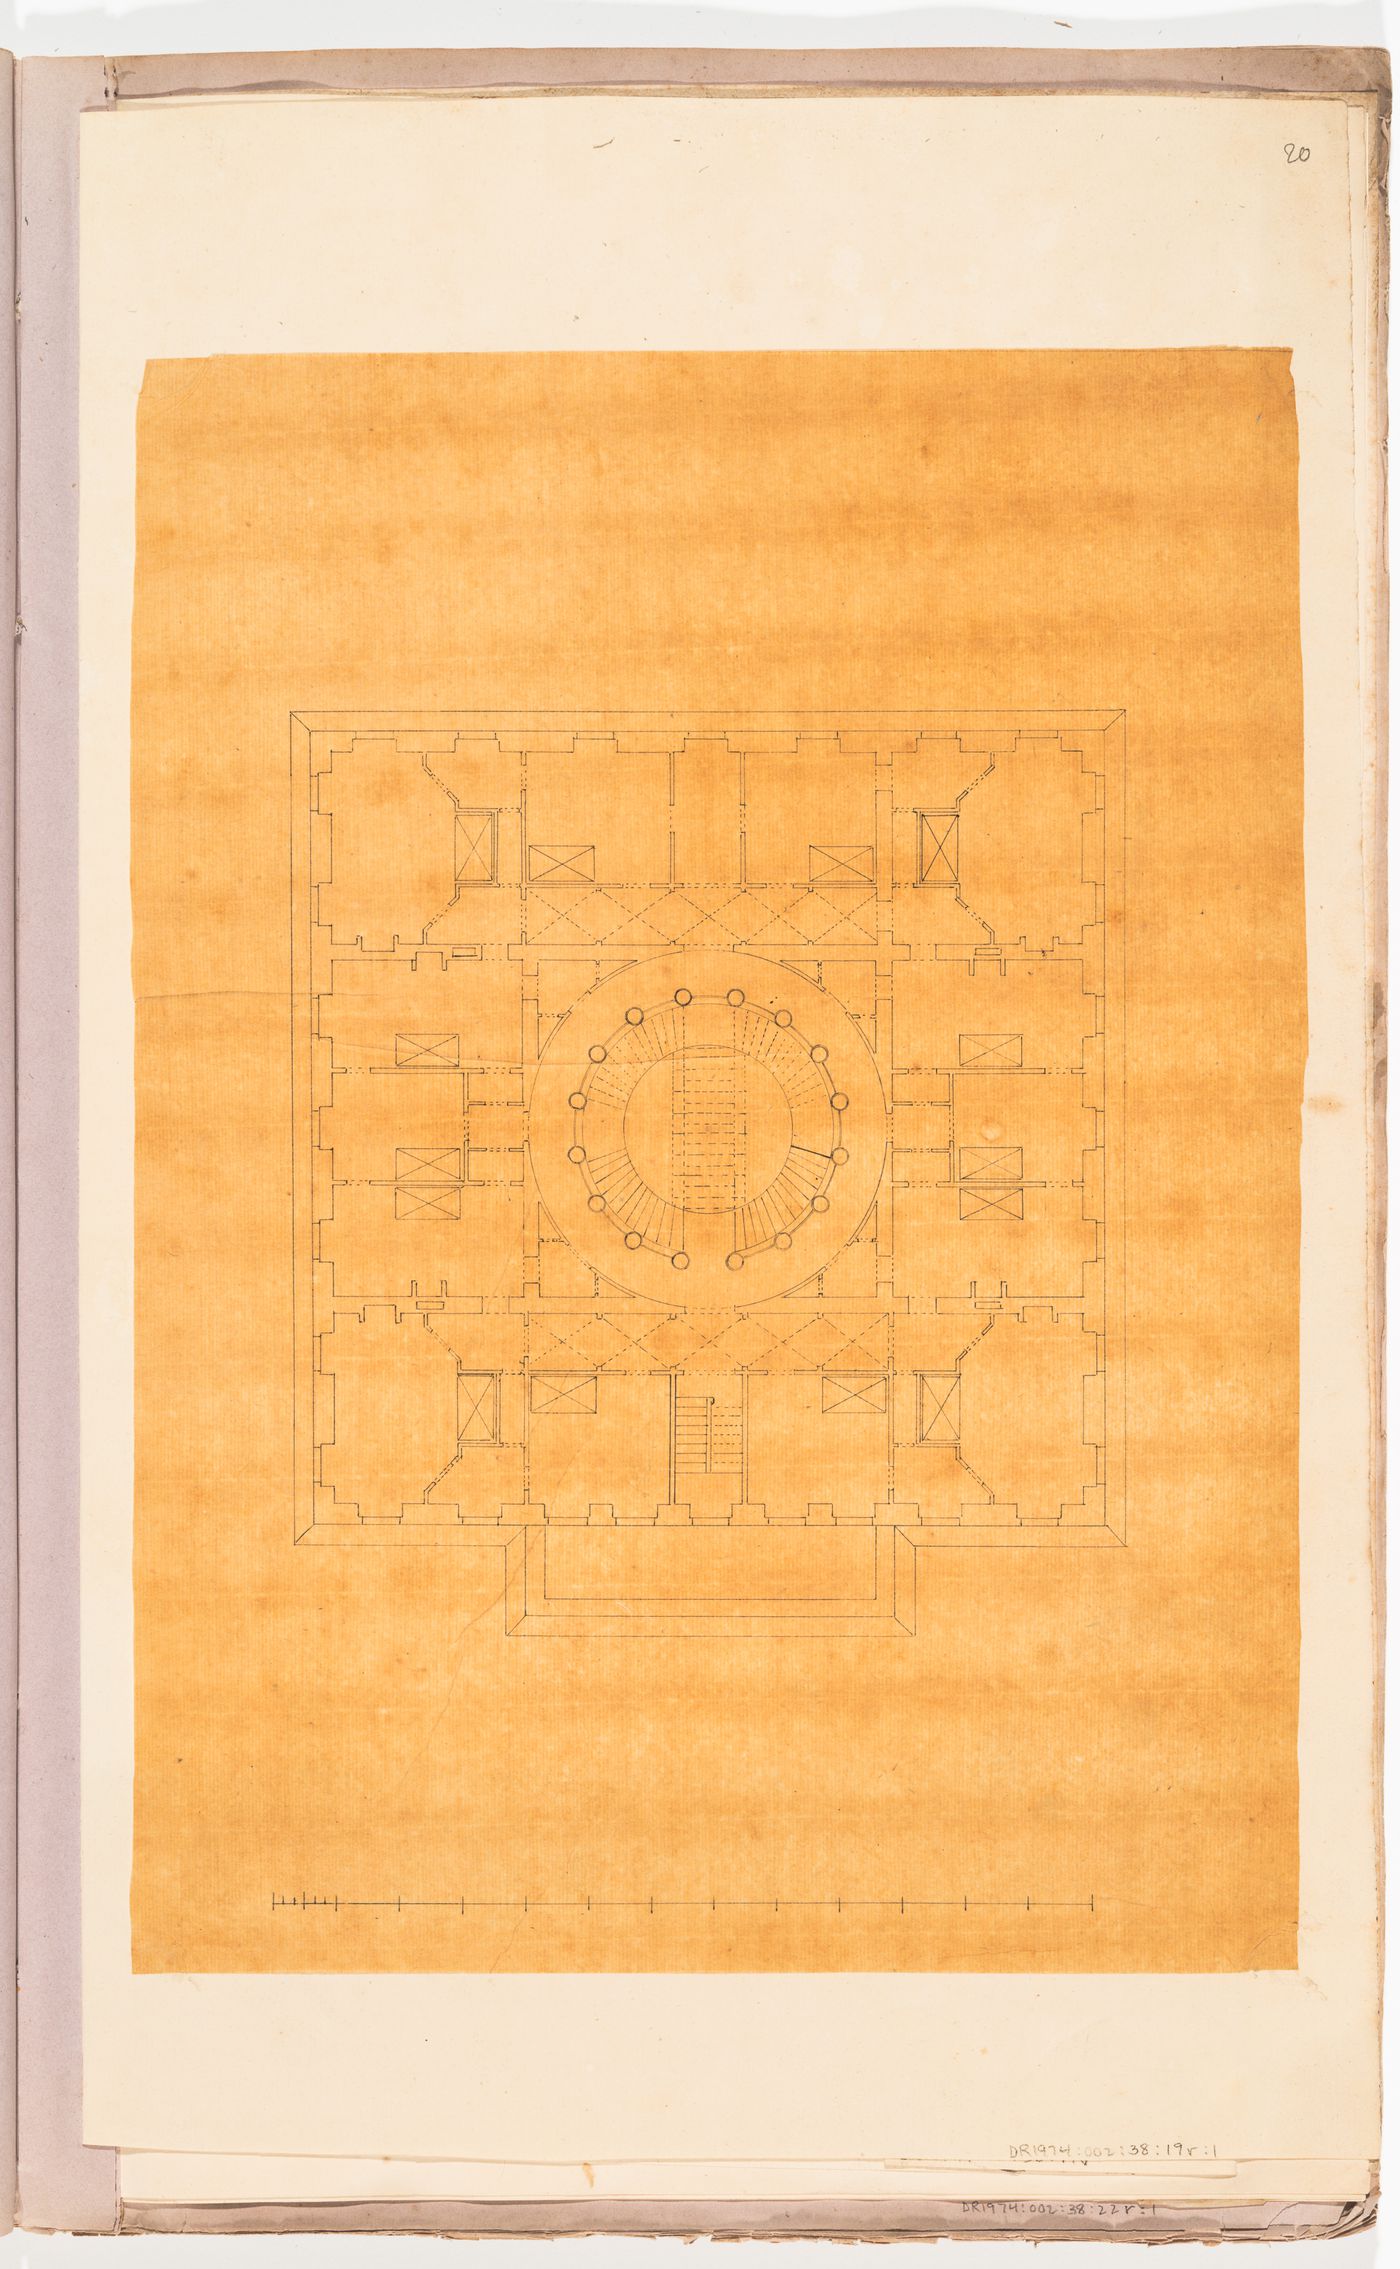 First floor plan of a country house for comte Anglès; verso: Elevation and section for a country house for comte Anglès